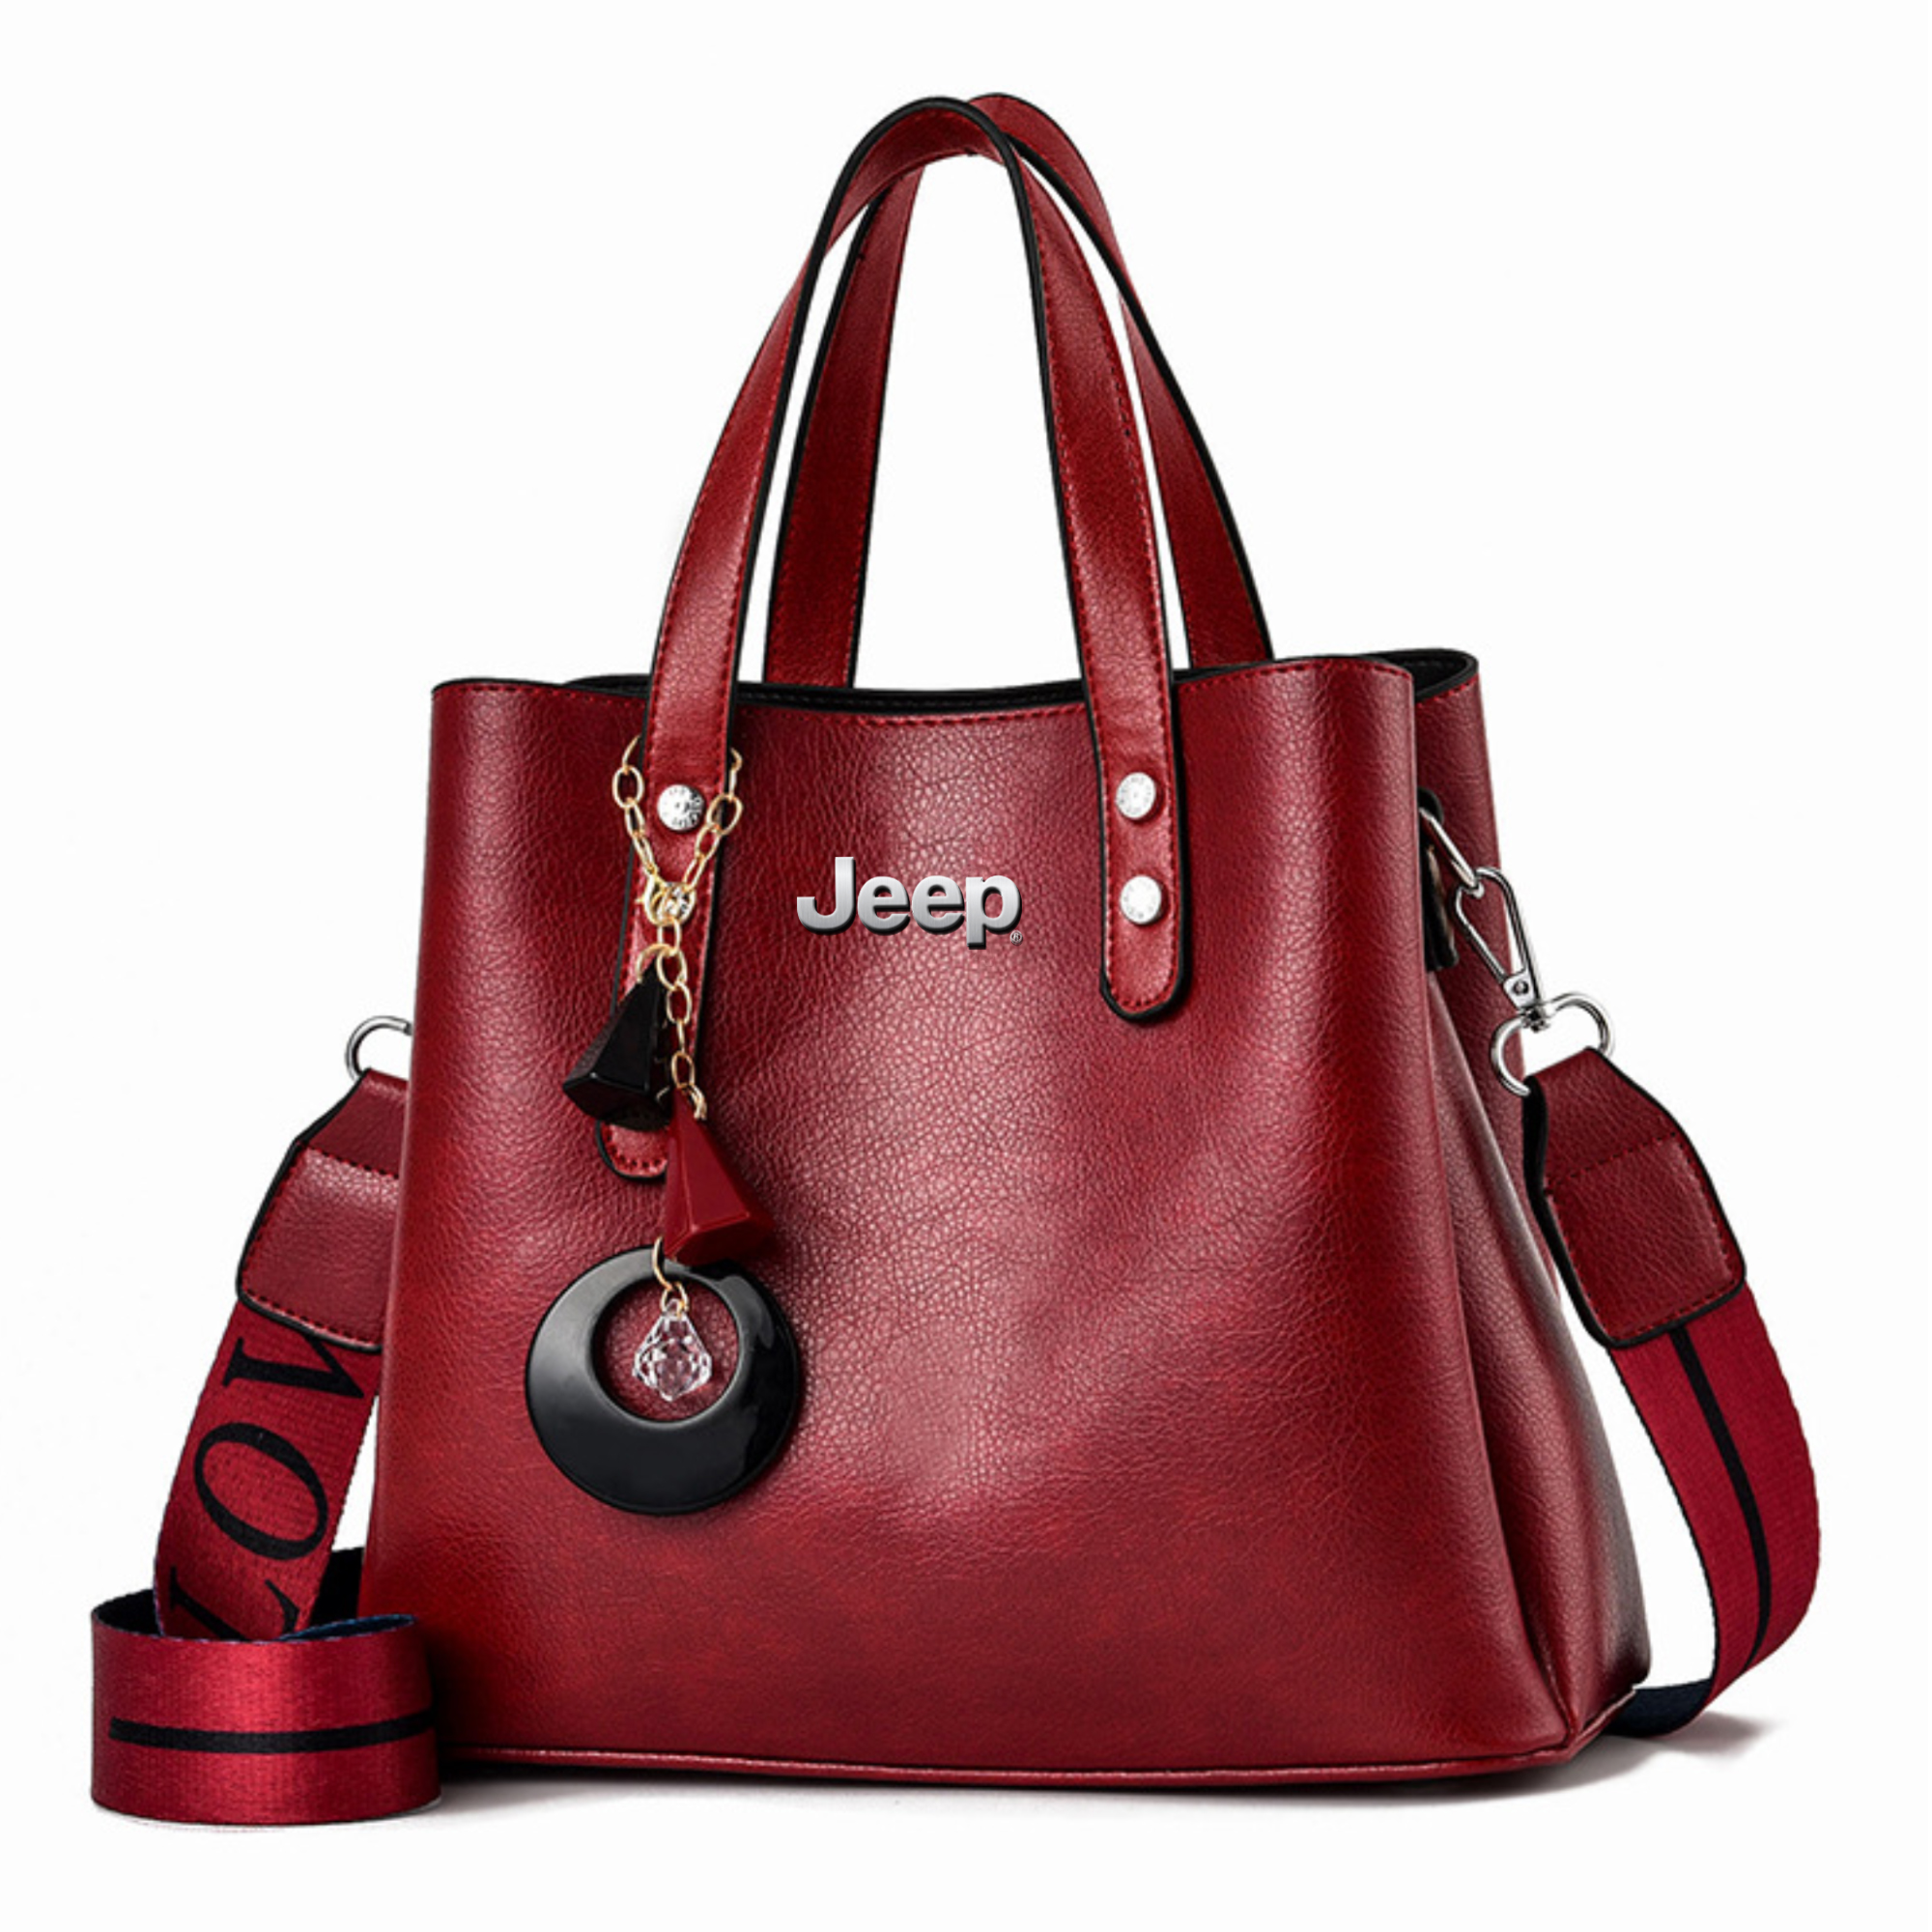 Introducing New Leather Jeep Purses in 2022 at Vascara